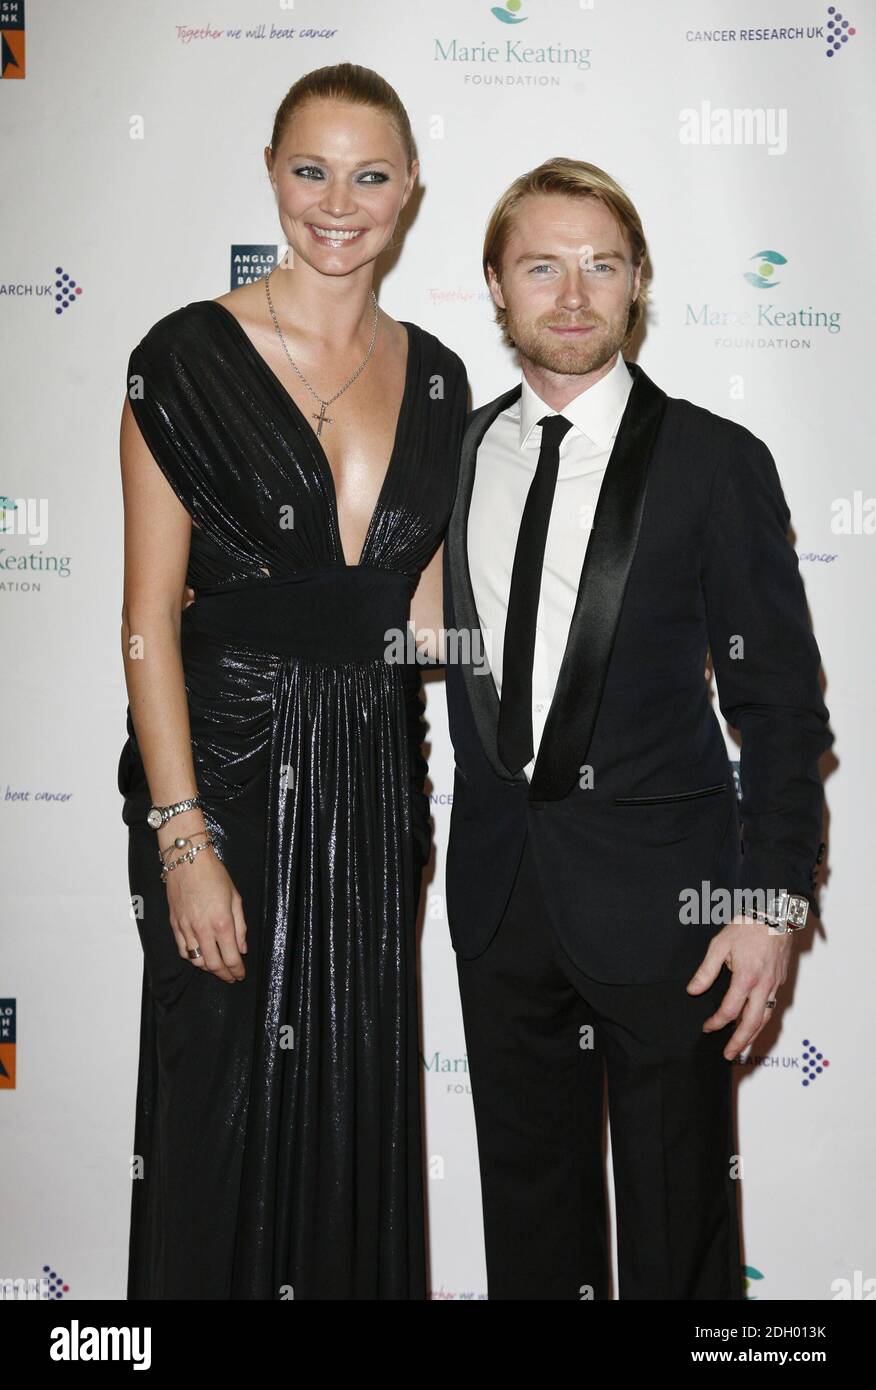 Jodie Kidd and Ronan Keating arriving at the Emeralds and Ivy Ball in aid of Cancer Research UK and The Marie Keating Foundation, Old Billingsgate Market, London. Stock Photo